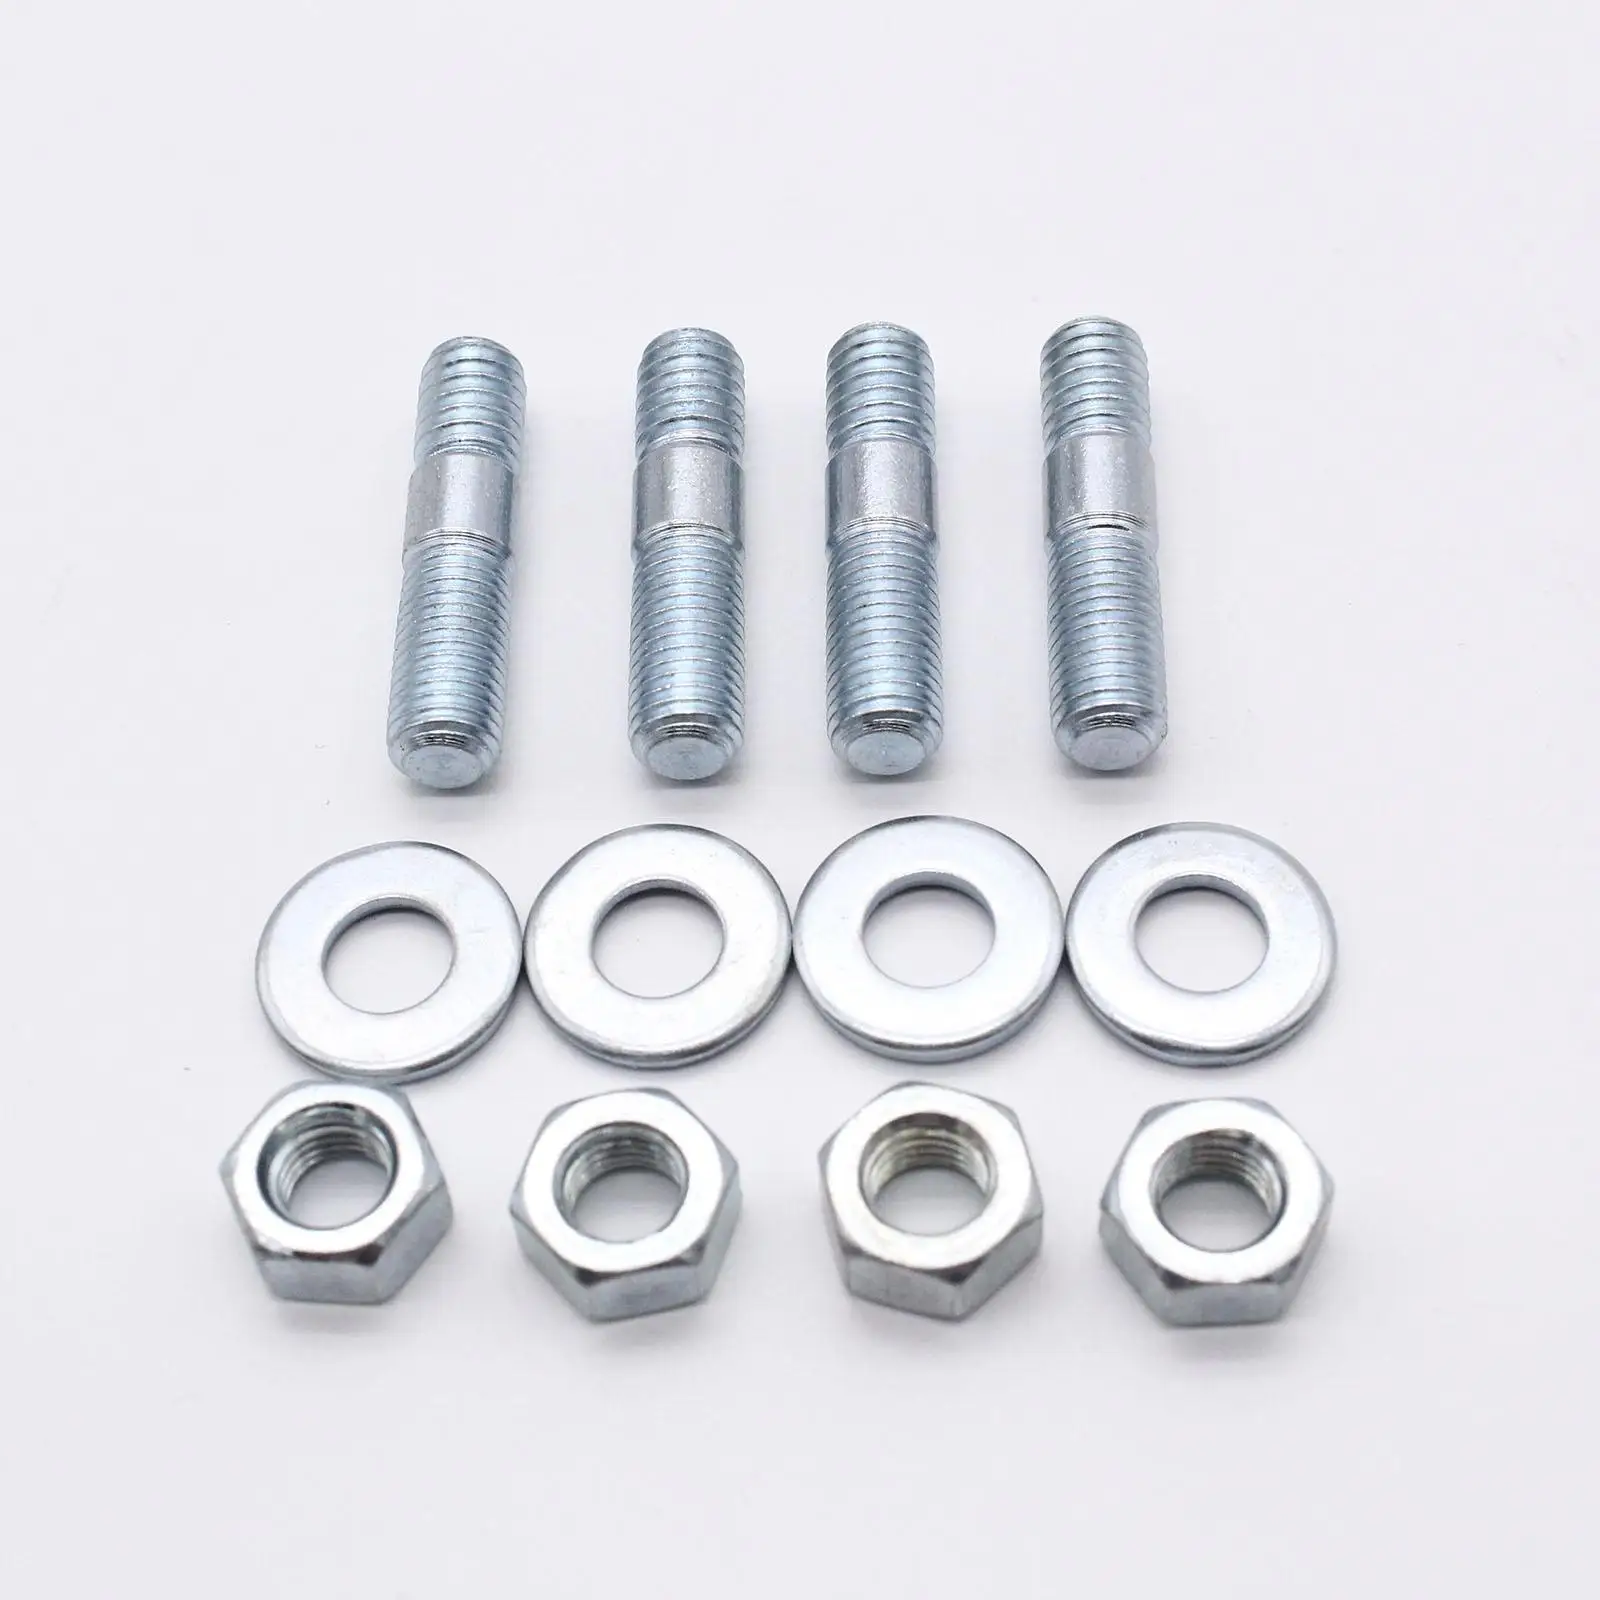 Carburetor Stud Kit Metal 1 3/8 inch Carb Studs Kit 5/16in Threads Carb Spacer Stud Kit Fit for Vehicle Parts Easy to Install